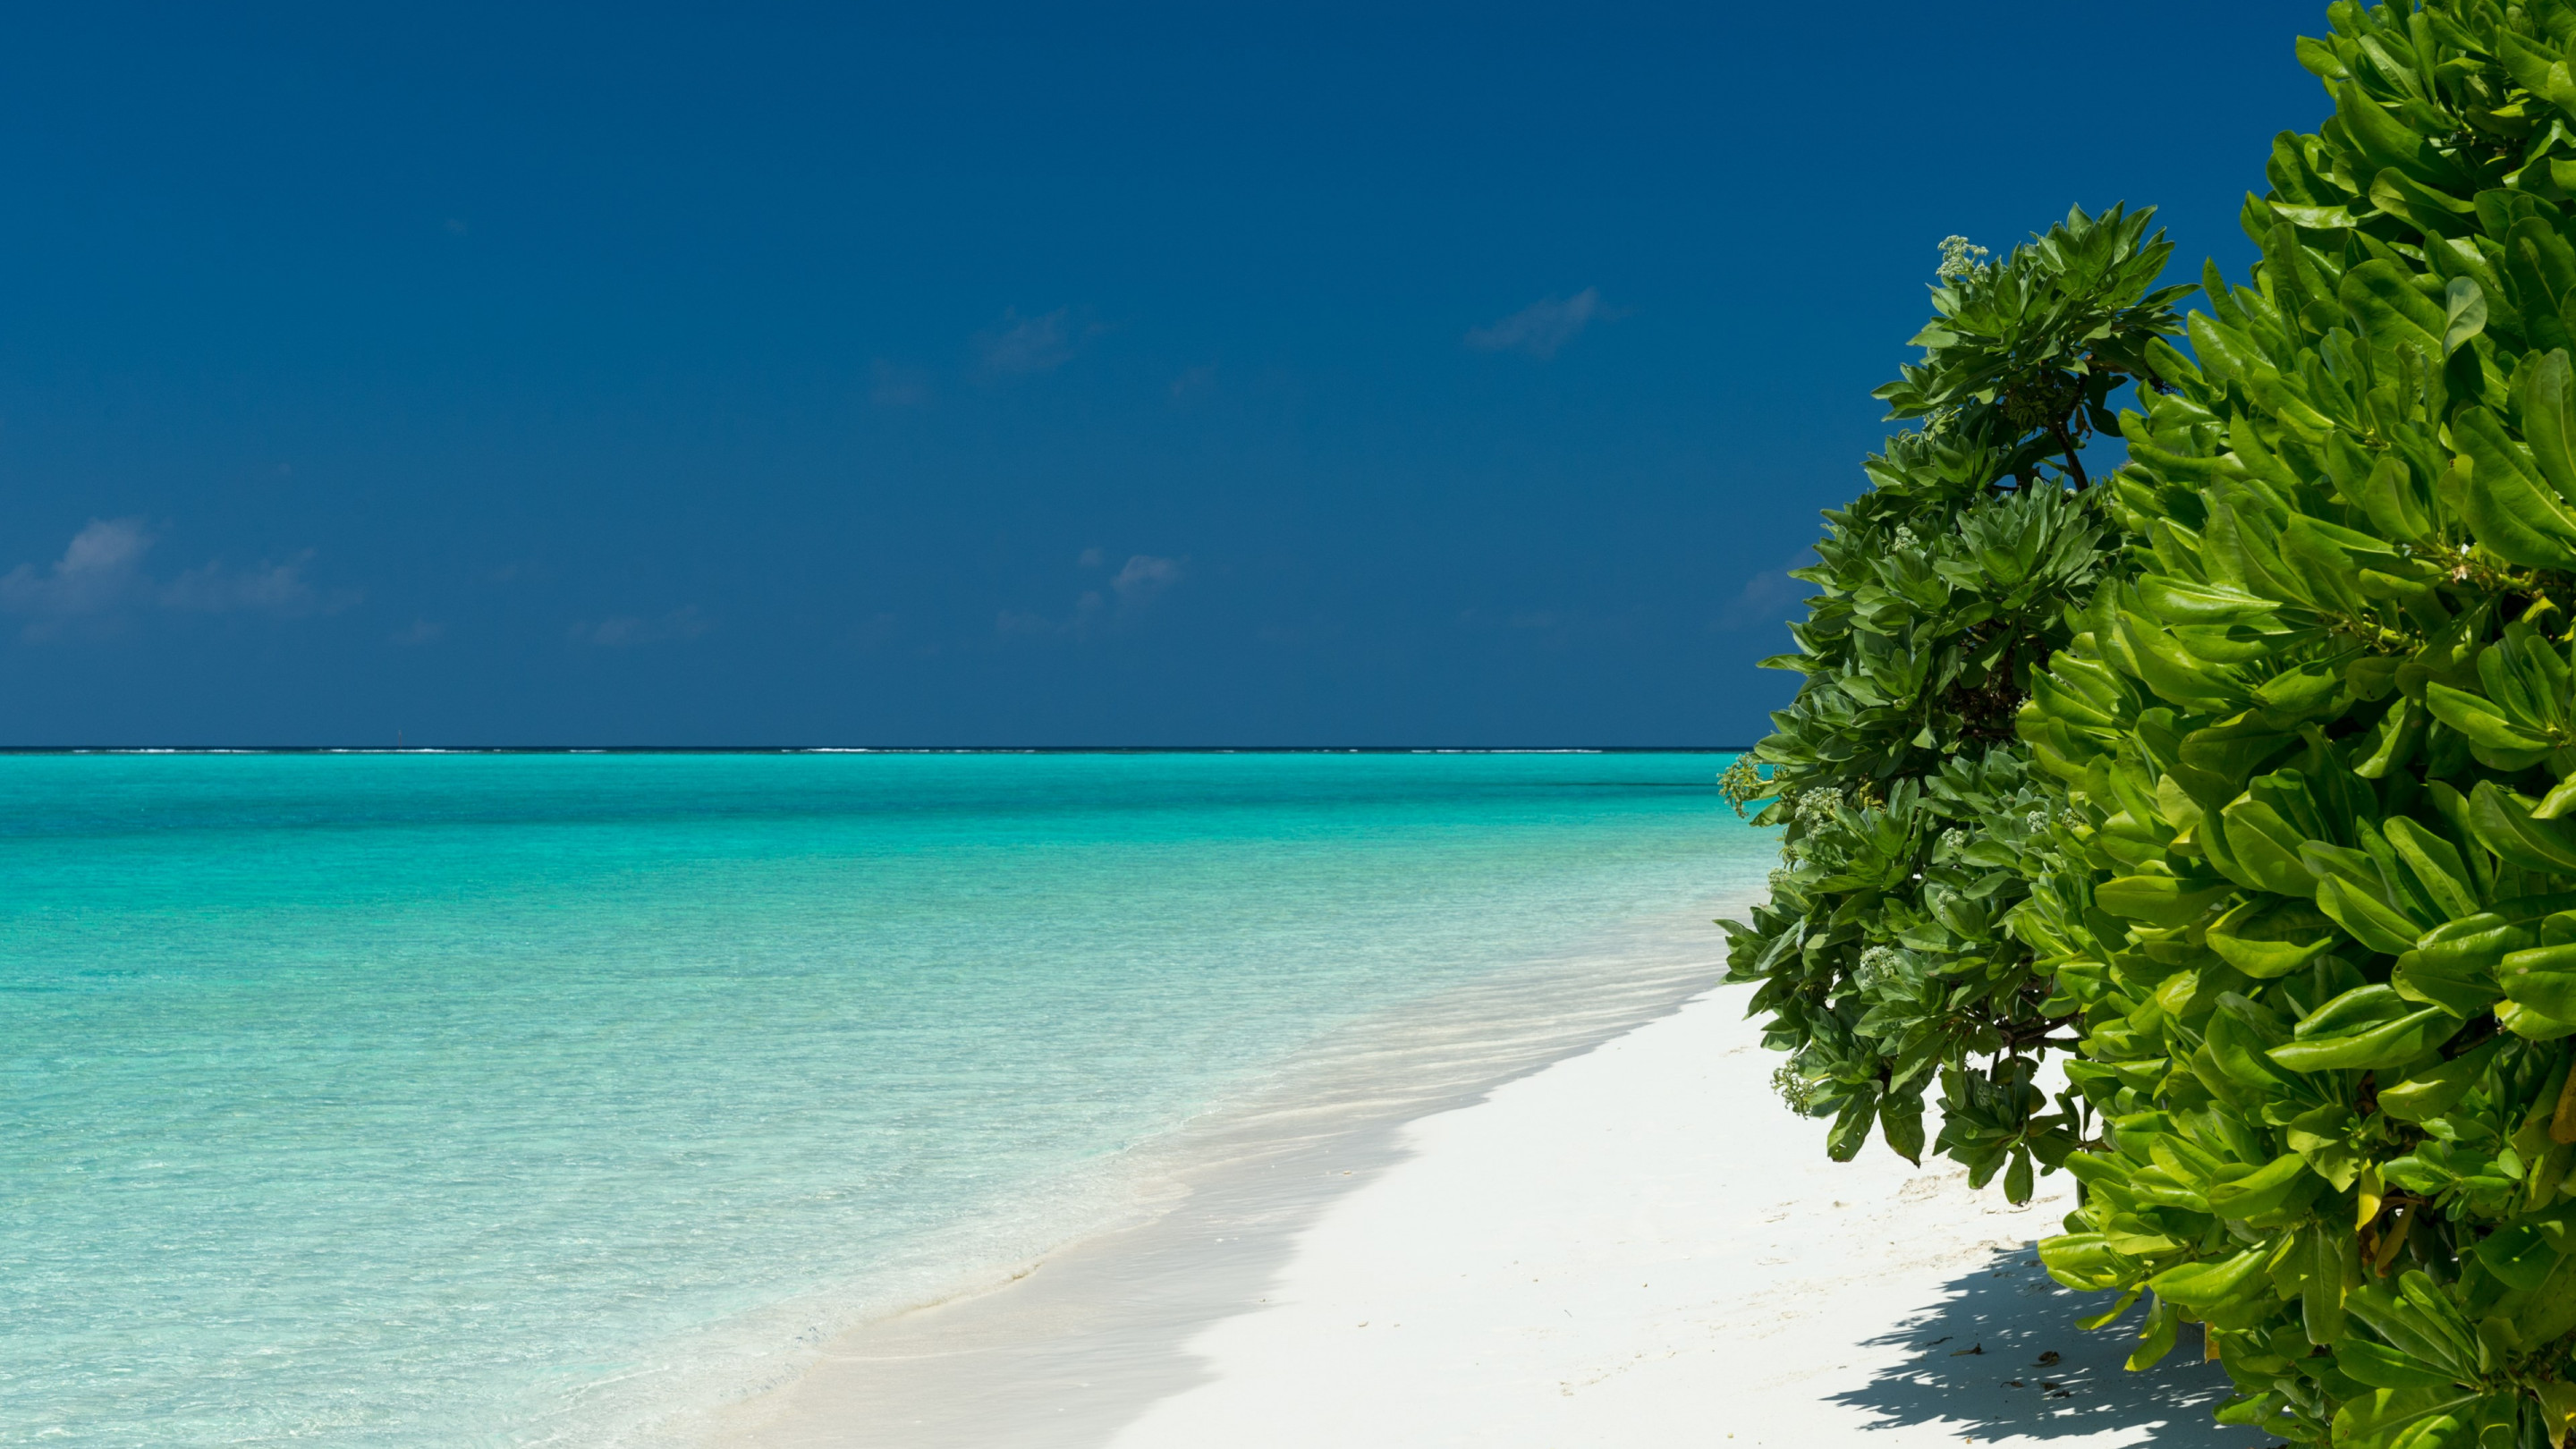 Turquoise waters of Maldives wallpaper 2880x1620